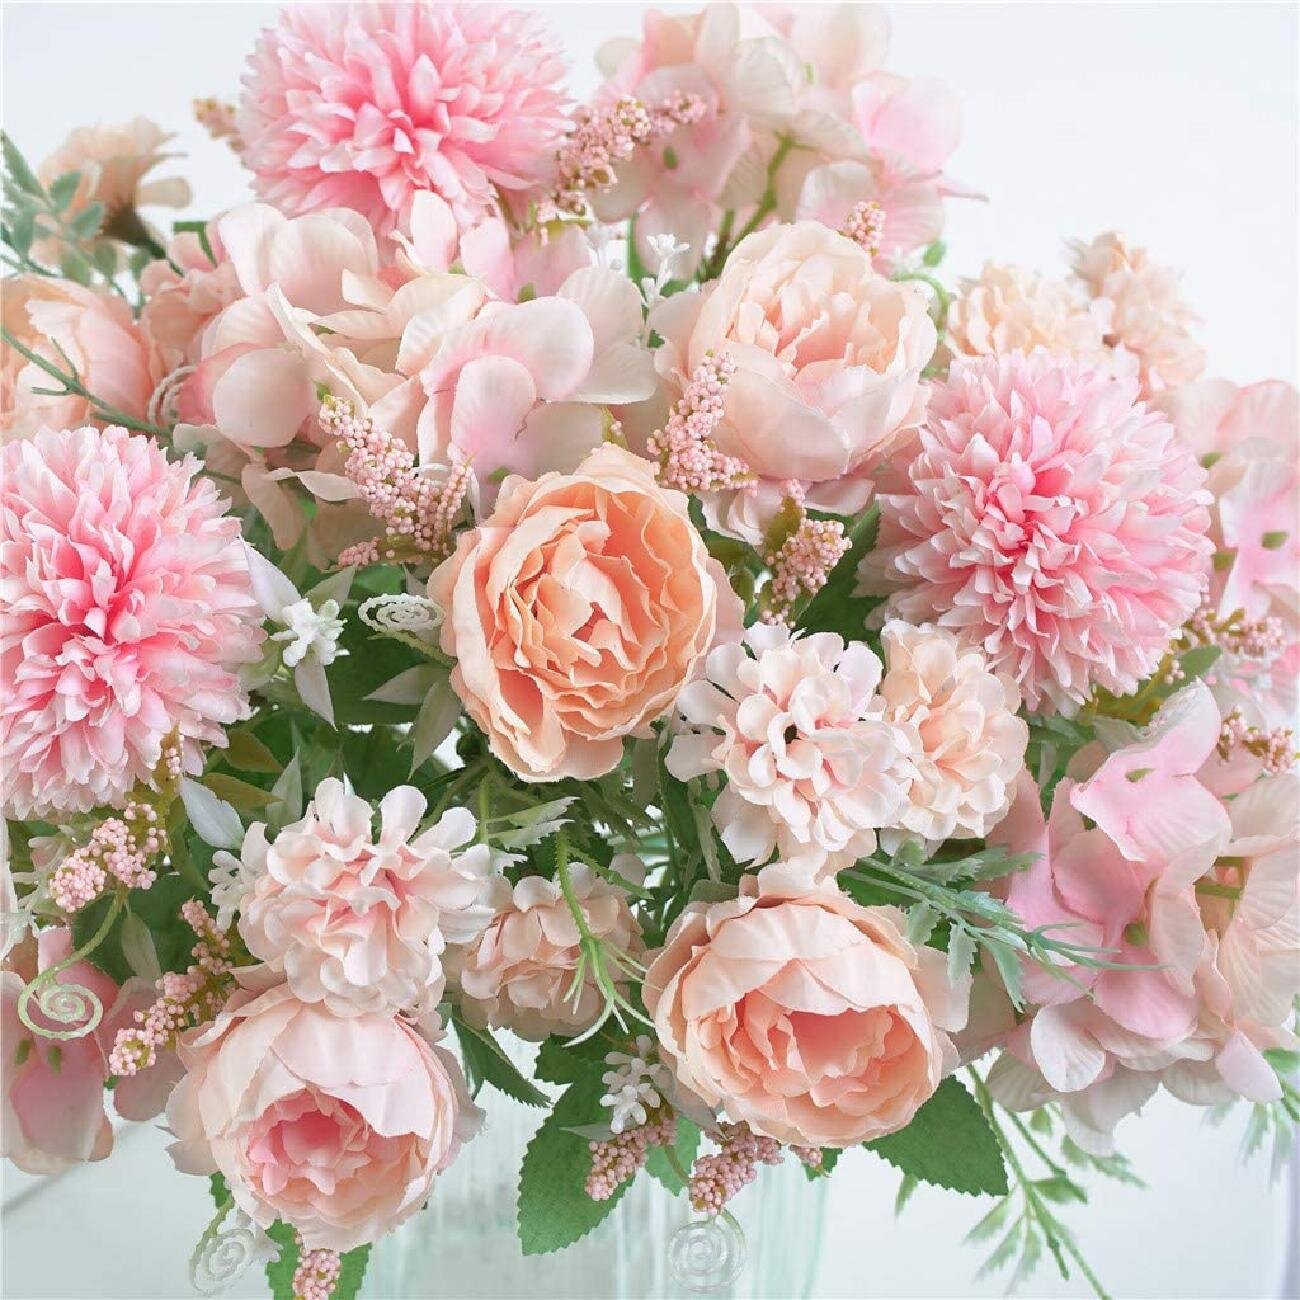 Artificial Peony Hydrangea Bouquets Fake Silk Carnations Flowers for Home/Office/Wedding Decor Table Centerpieces LEMESO 2 Pack Light Pink Artificial Flowers 